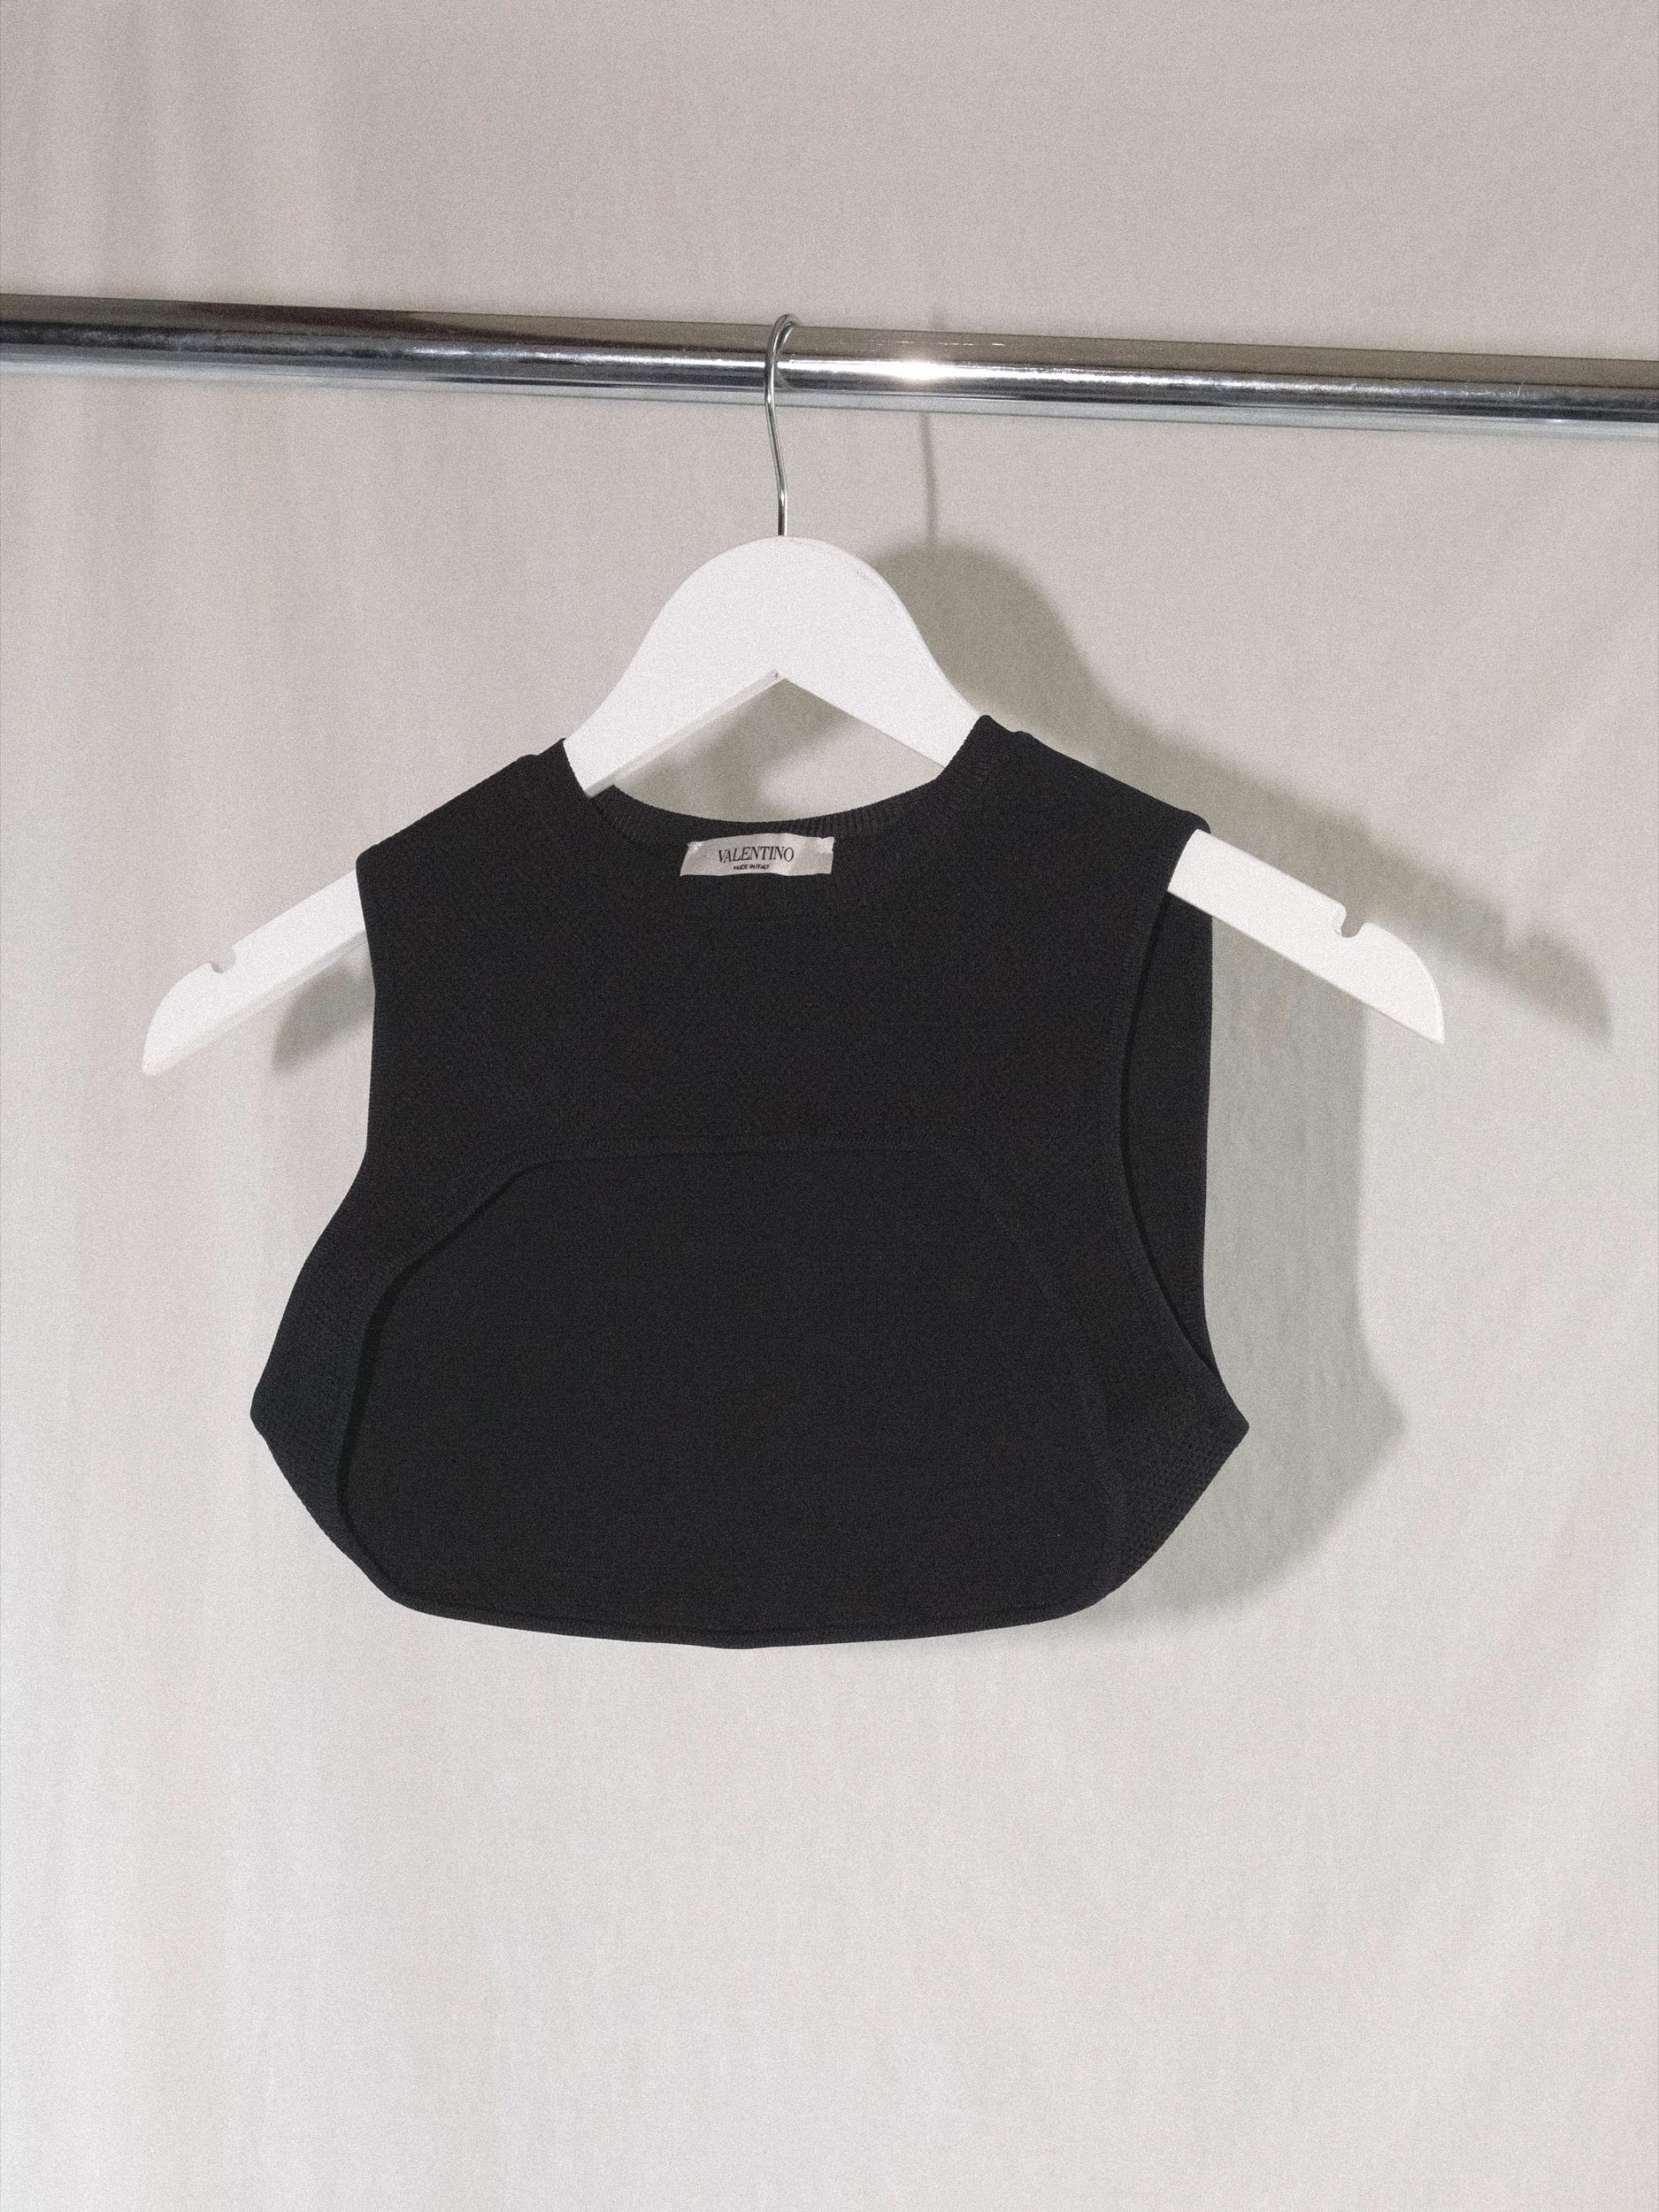 Valentino Crop Top Collar Harness Layering Piece Size Small 2000's  9